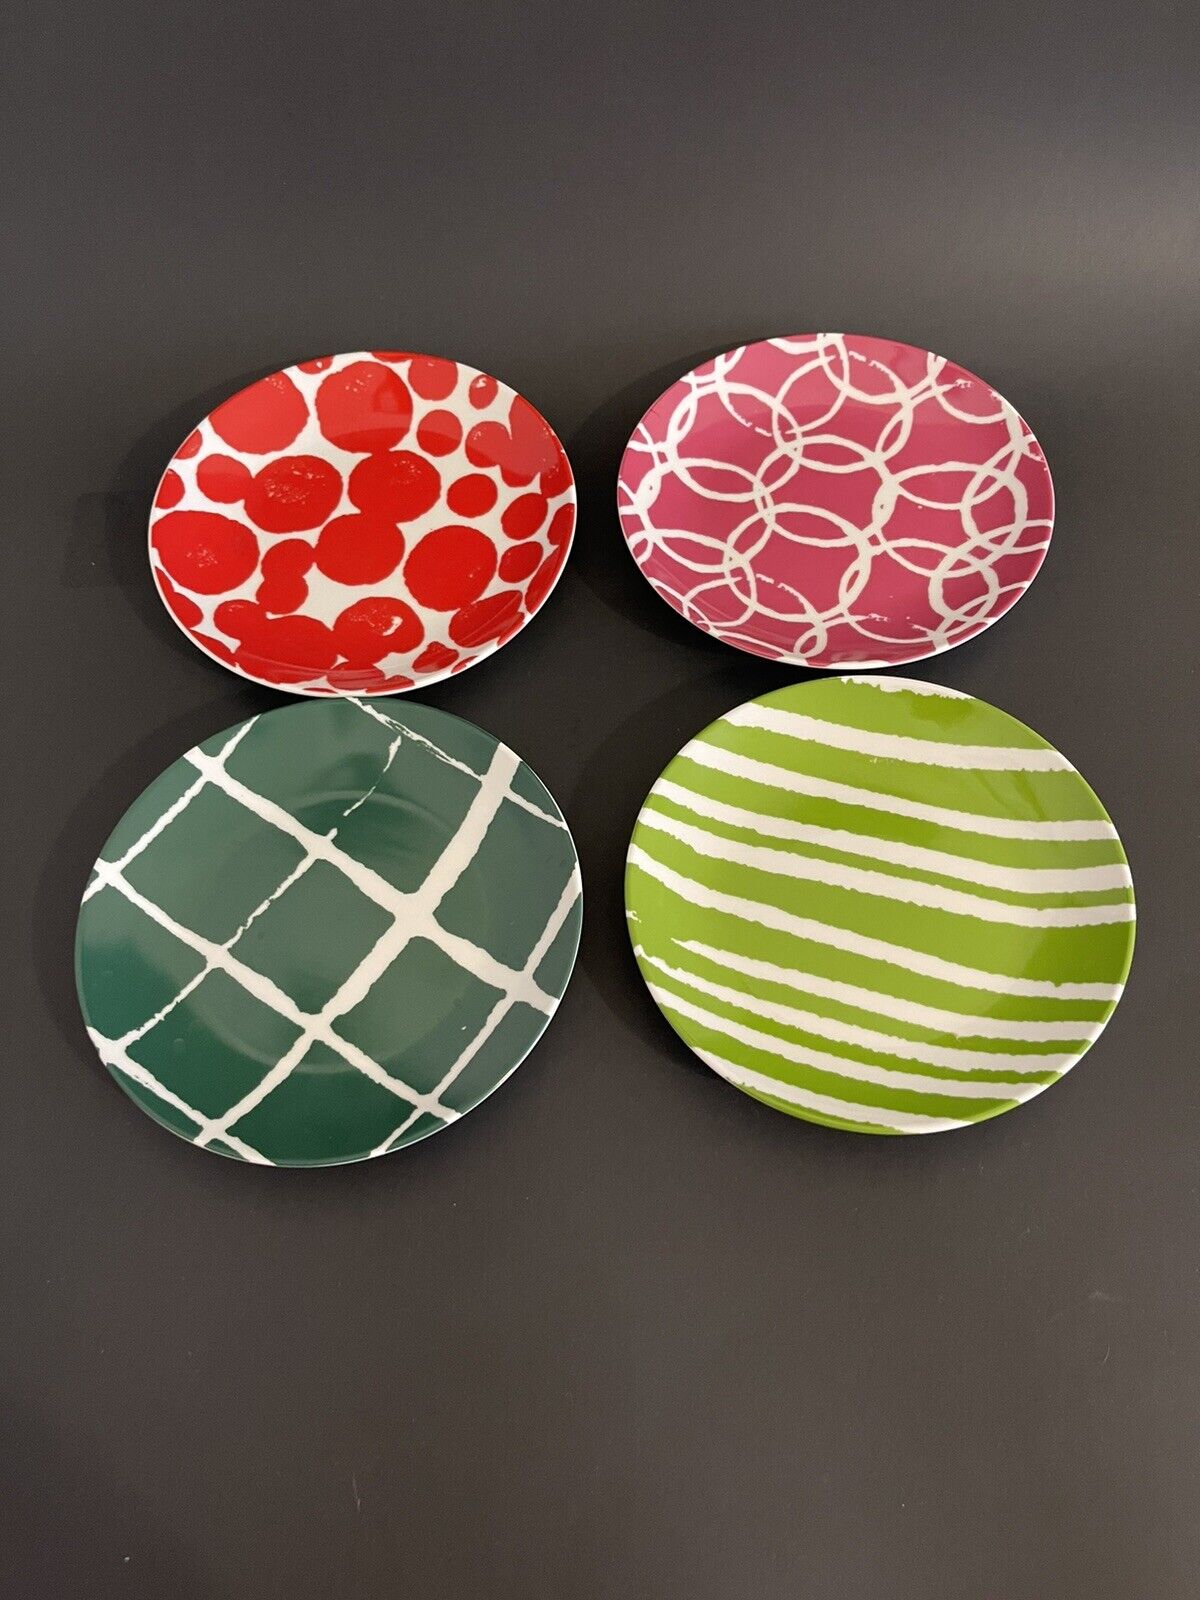 CRATE & BARREL JENNY BOWERS (4) Assorted Designs & Colors APPETIZER PLATES 6.5”